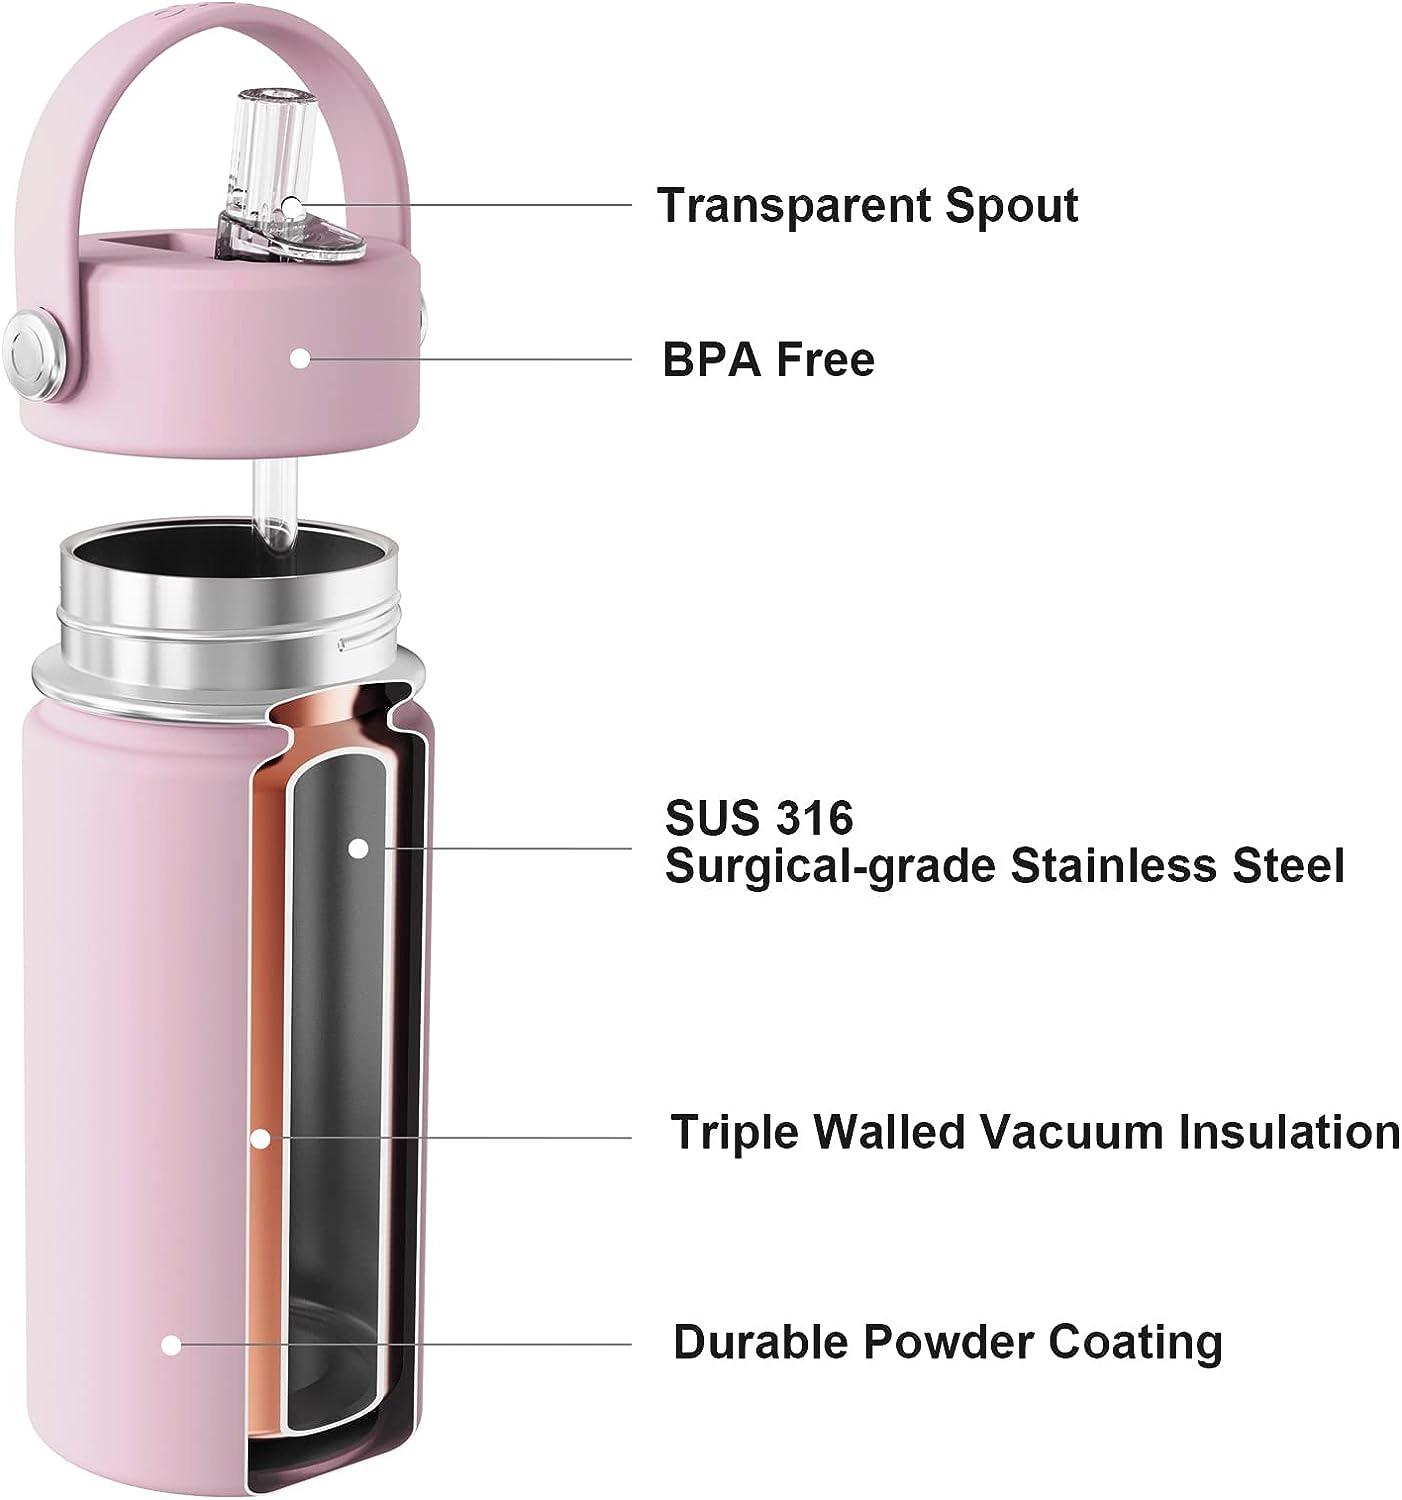 Water Bottle with Straw  Kids 10oz Stainless Steel Water Bottle – Thermos  Brand